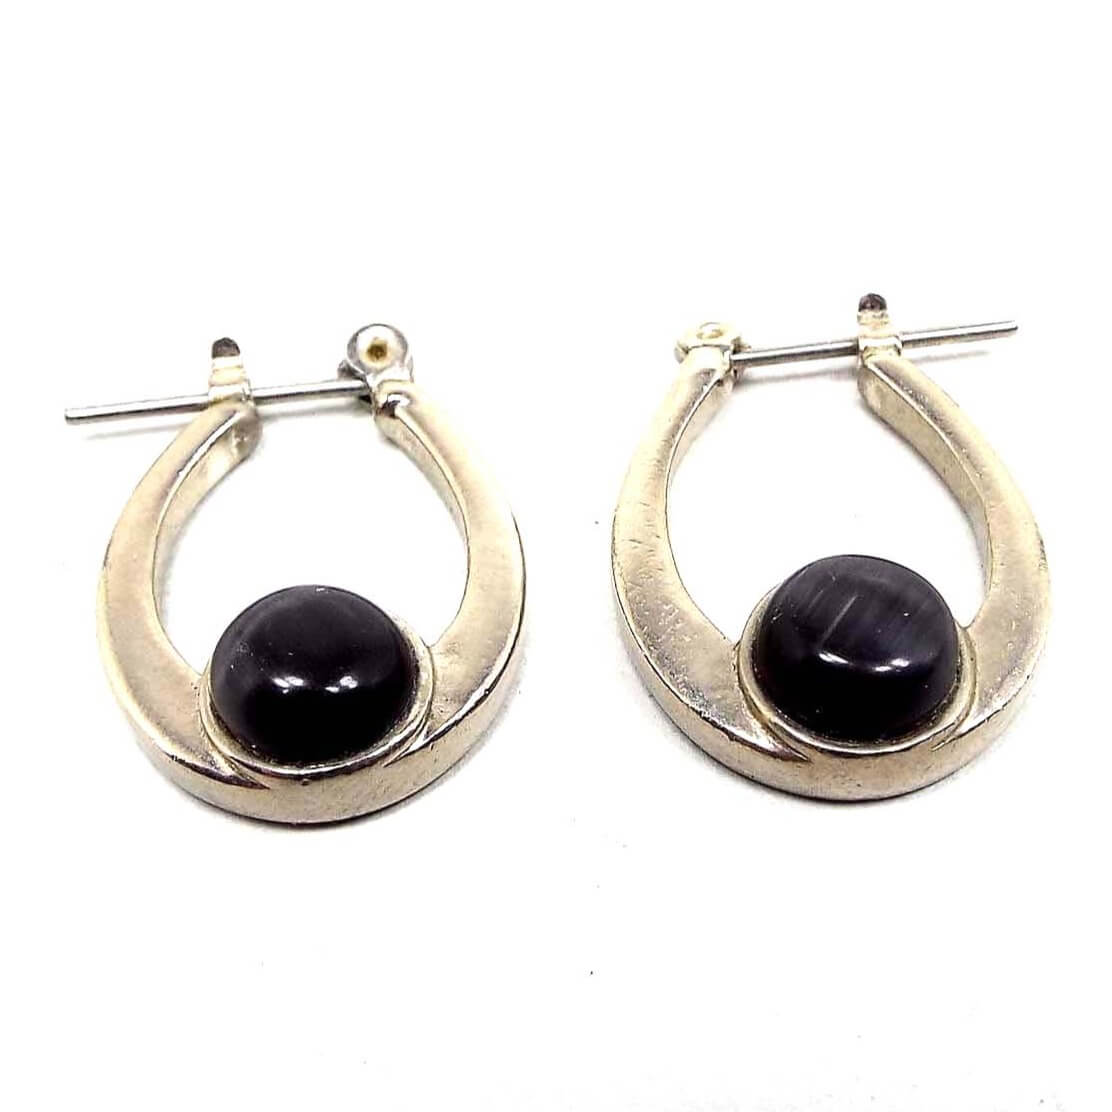 Angled side view of the retro vintage glass faux cat's eye hoop earrings. The metal is silver tone in color. The hoops are oval teardrop shaped. At the bottom is a glass cab in dark gray that has flashes of lighter gray as you move around in the light. Earrings are one sided.